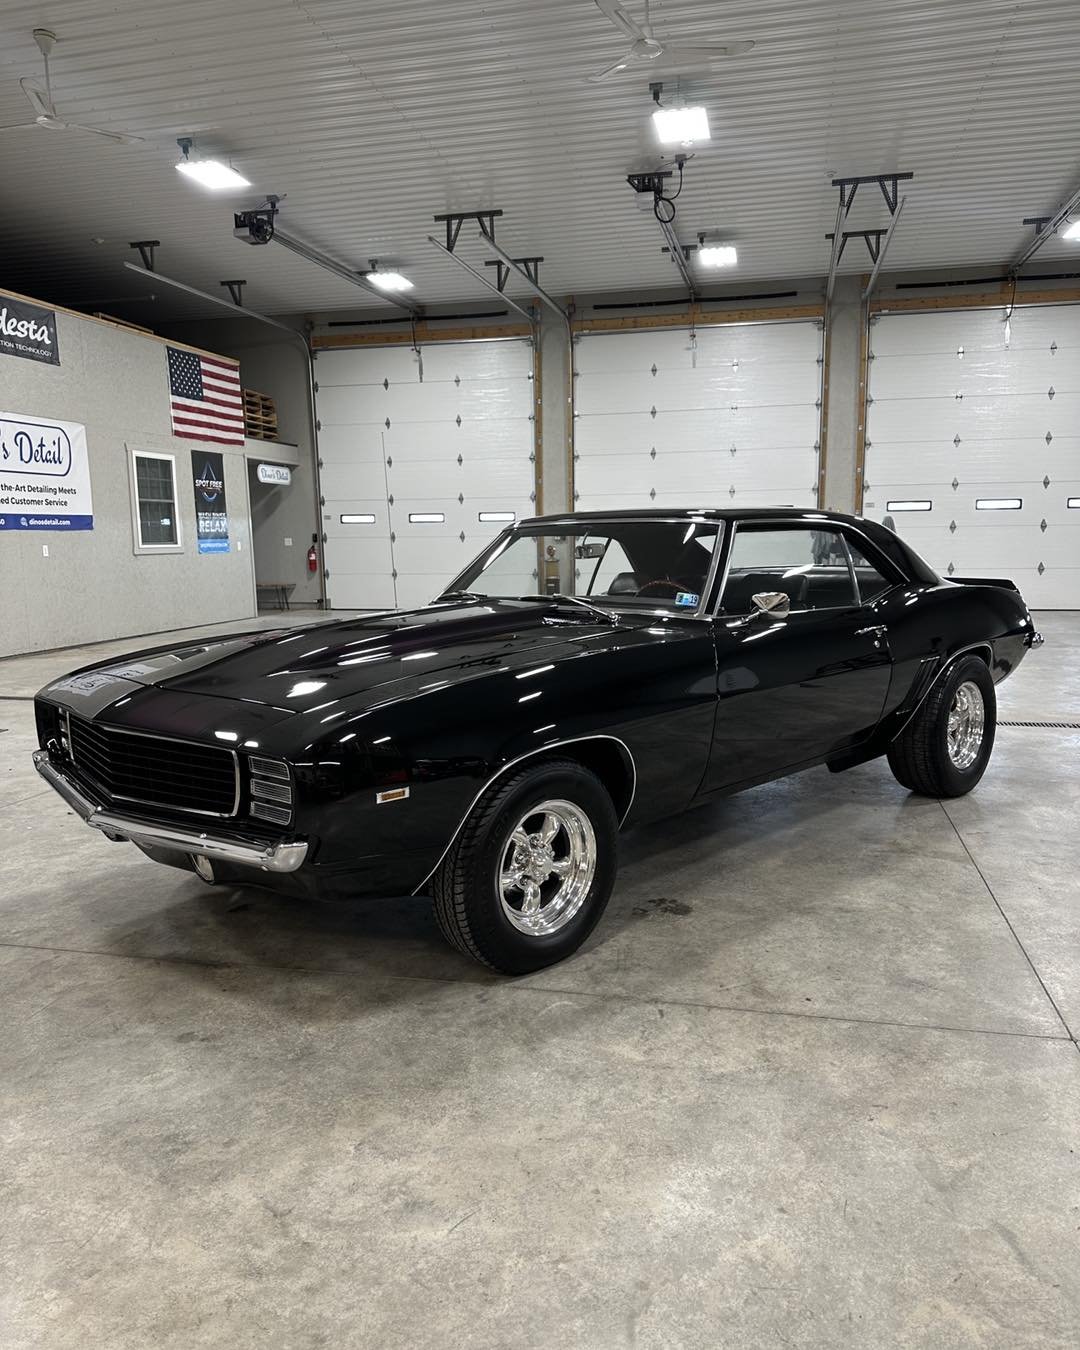 Beautiful 69 Camaro we had in the shop for a detail and paint correction. That black paint had picked up lots of swirl marks over the years. We performed 2 stages of machine polishing to remove as much as we could, then topped it with a layer of seal